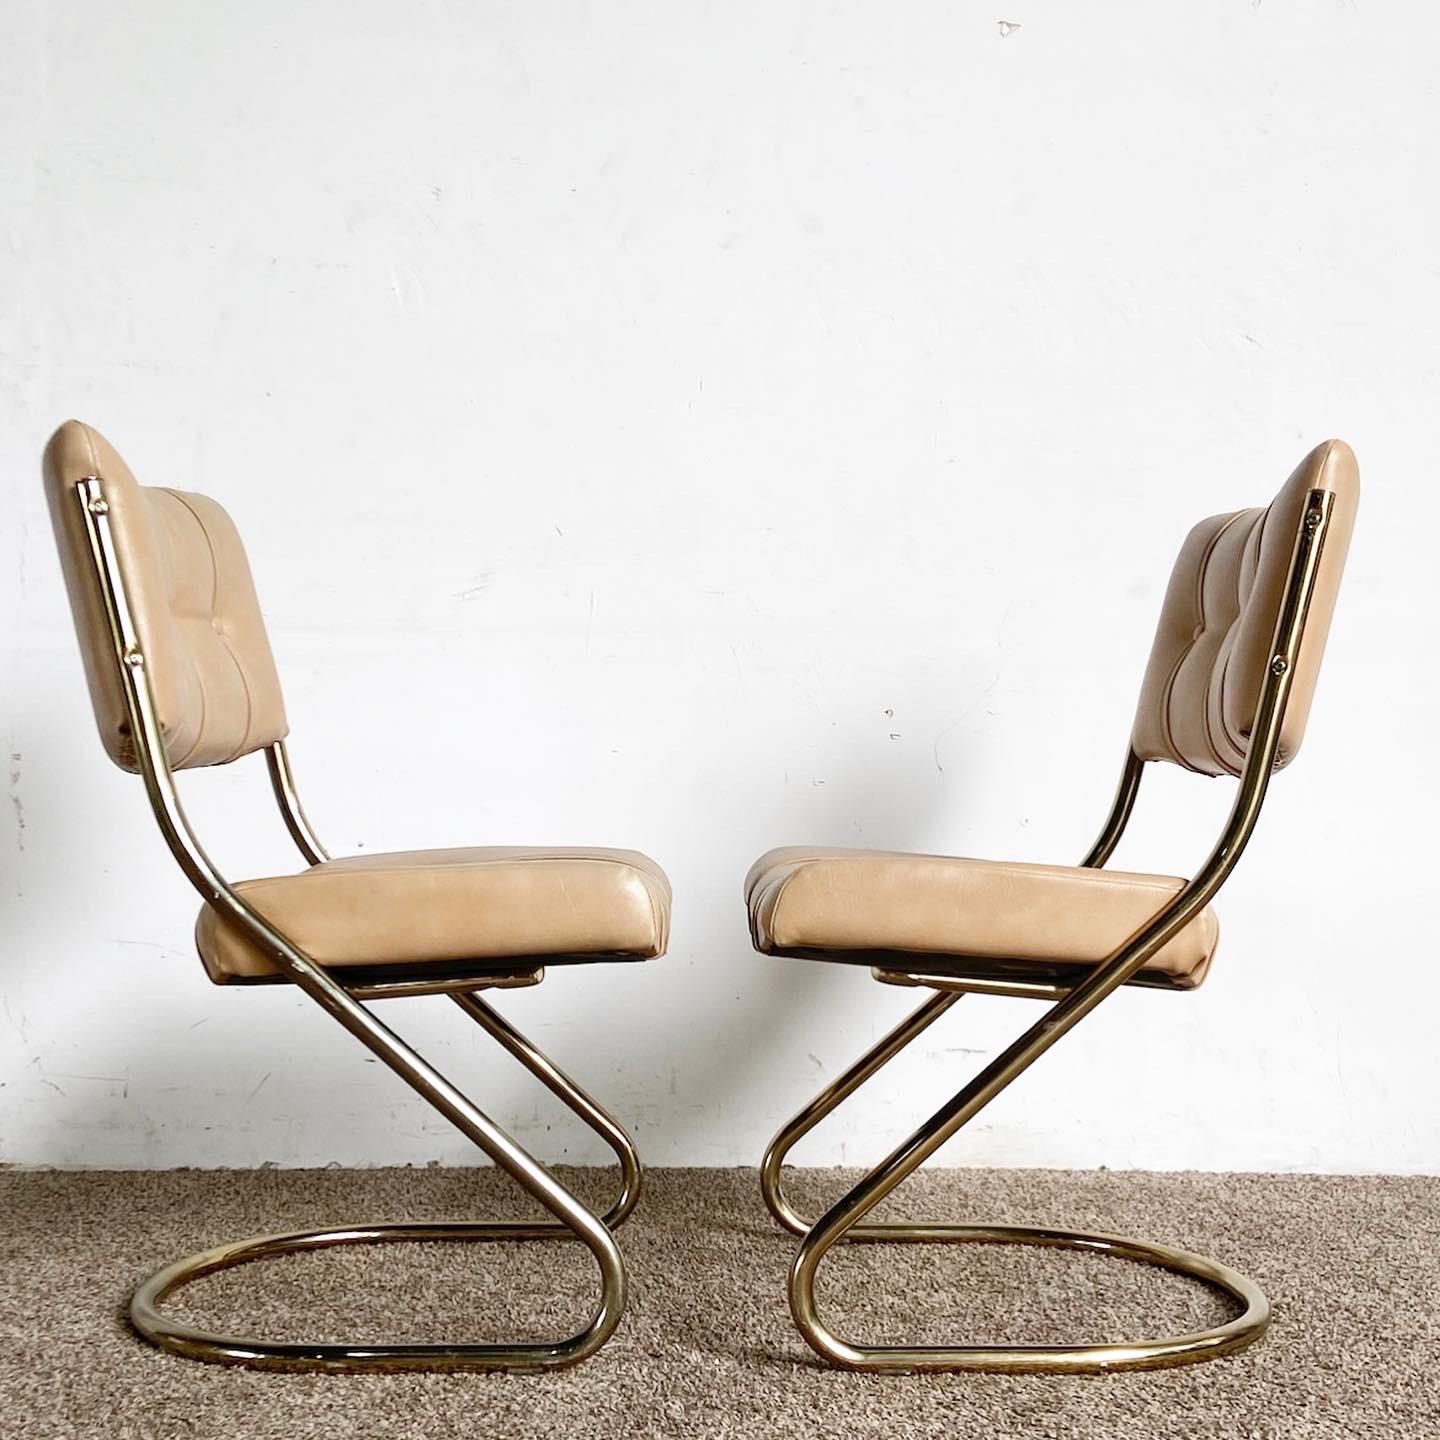 American Mid Century Modern Gold and Tan Tufted Cantilever Chairs by Chromcraft - a Pair